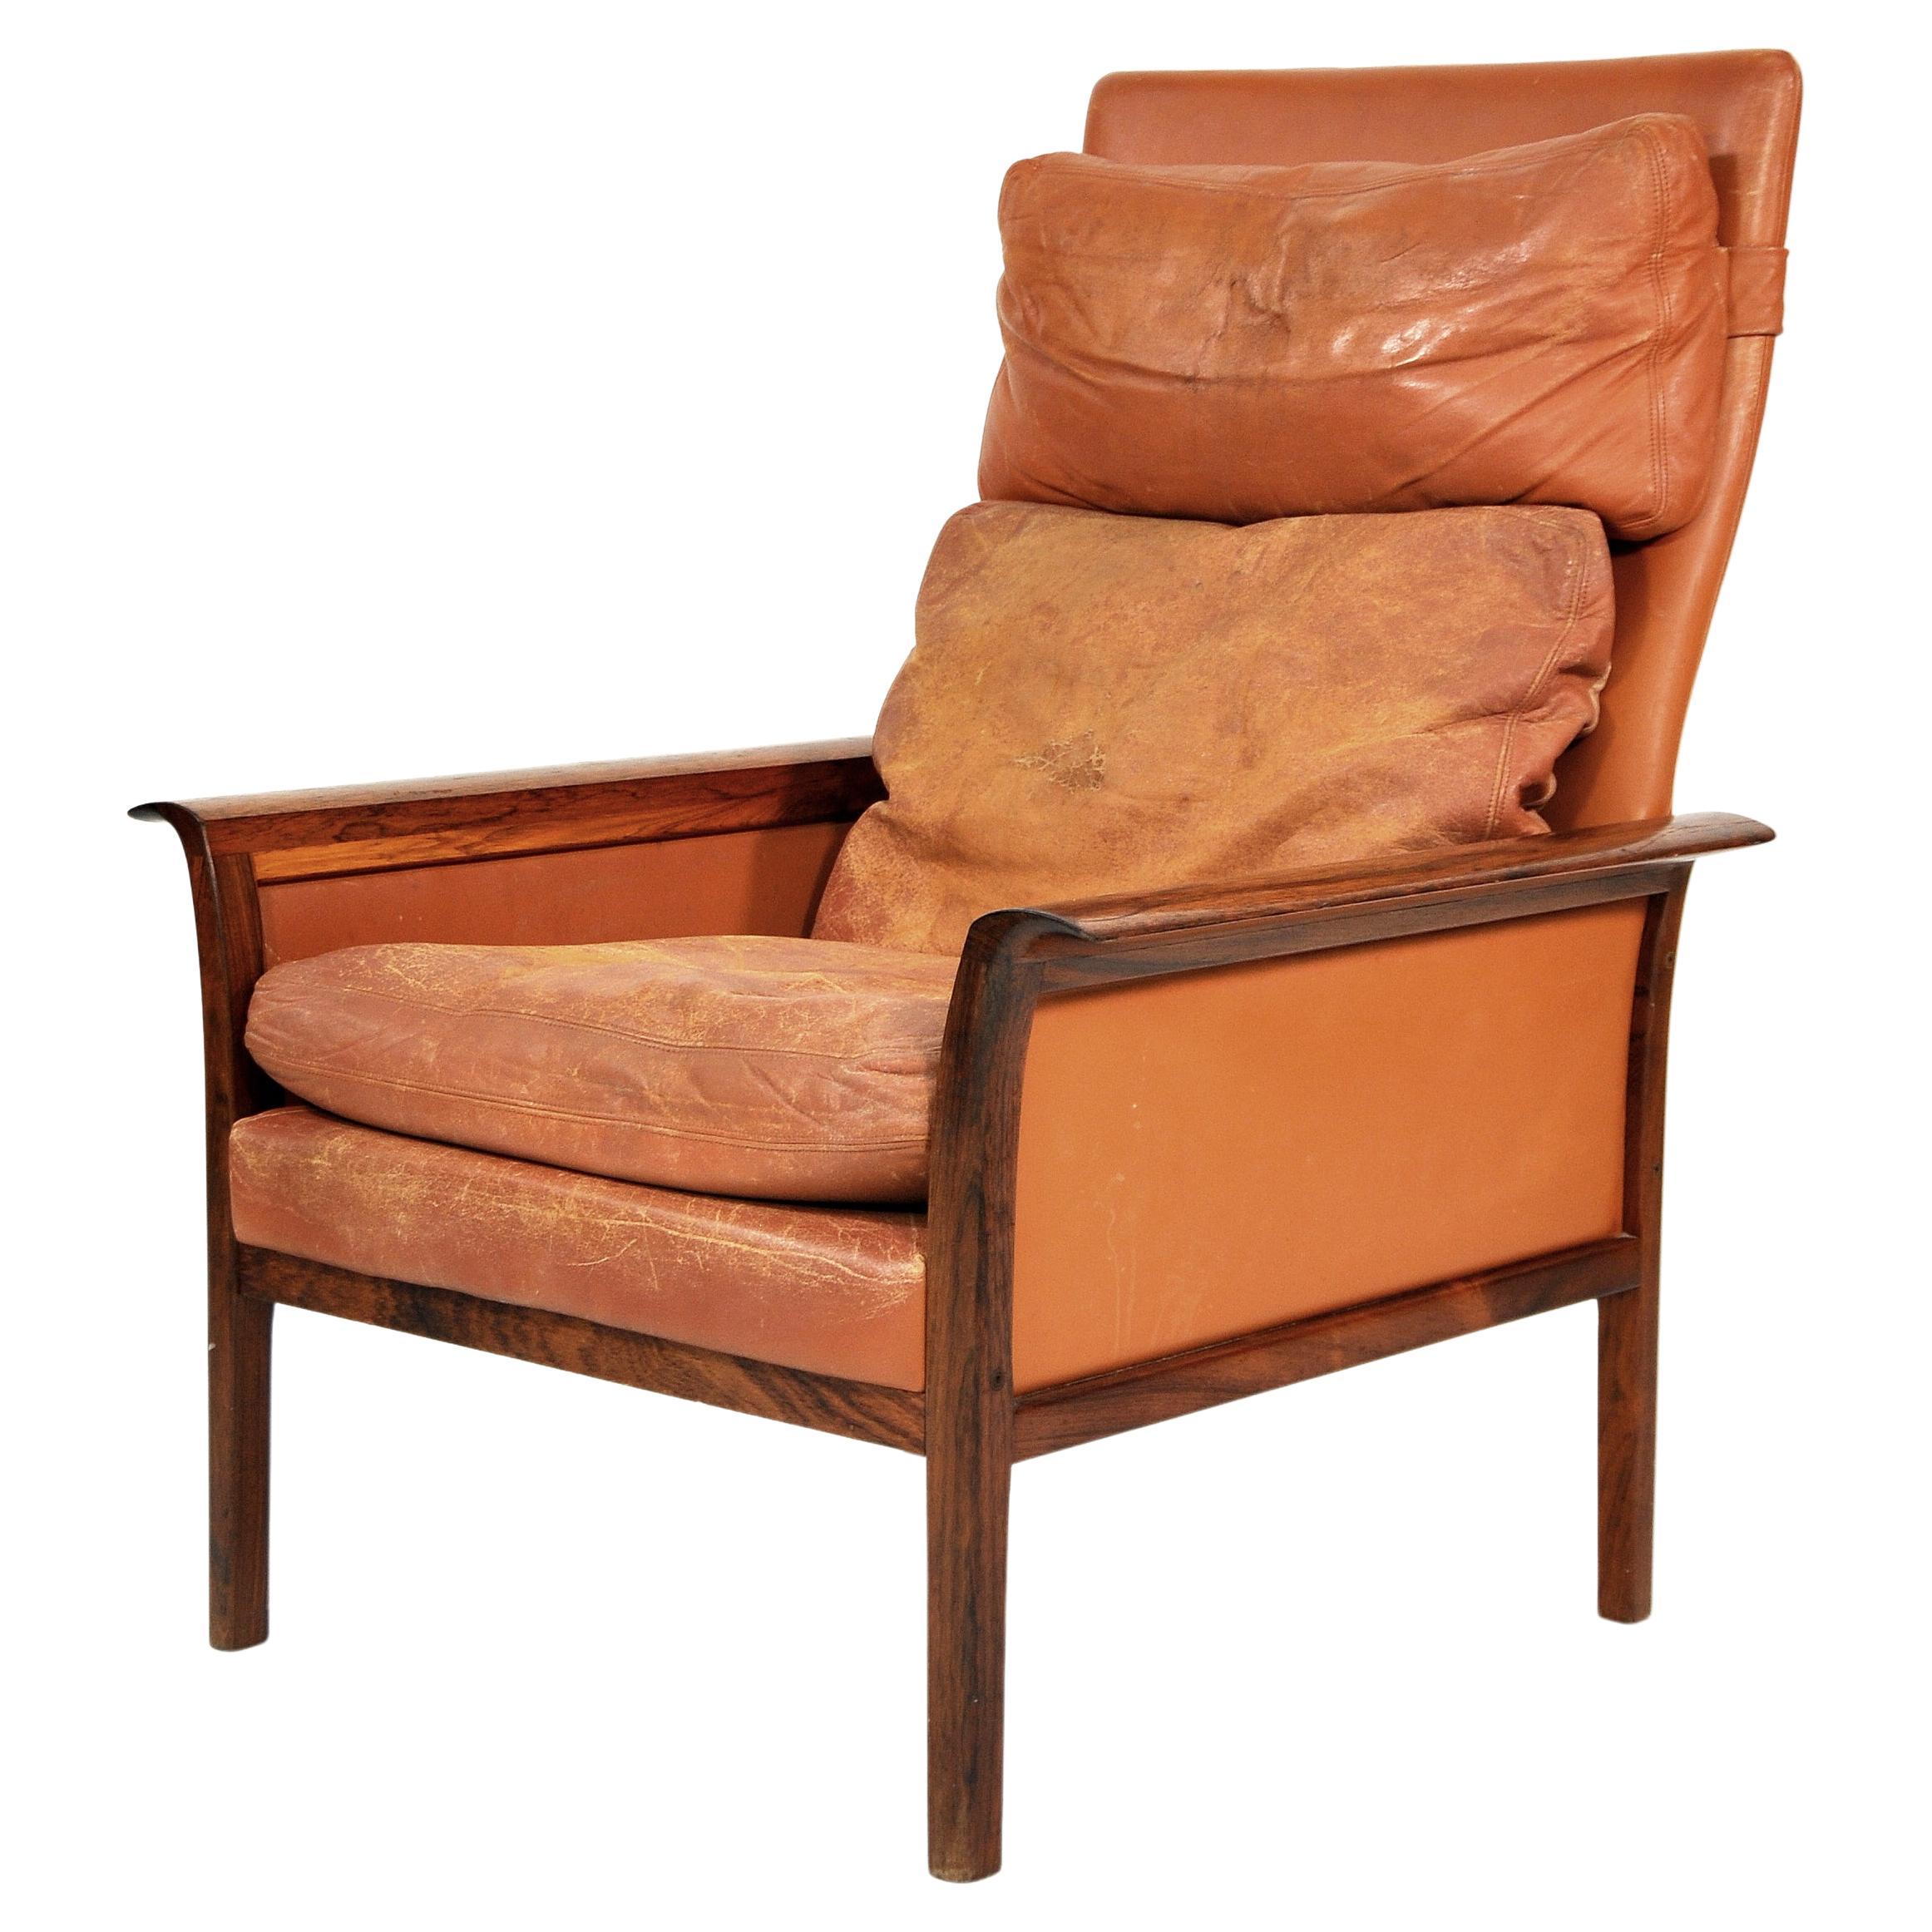 20th Century Rosewood Cognac Leather Chairs with Ottoman, by Fredrik Kayser for Vatne Mobler